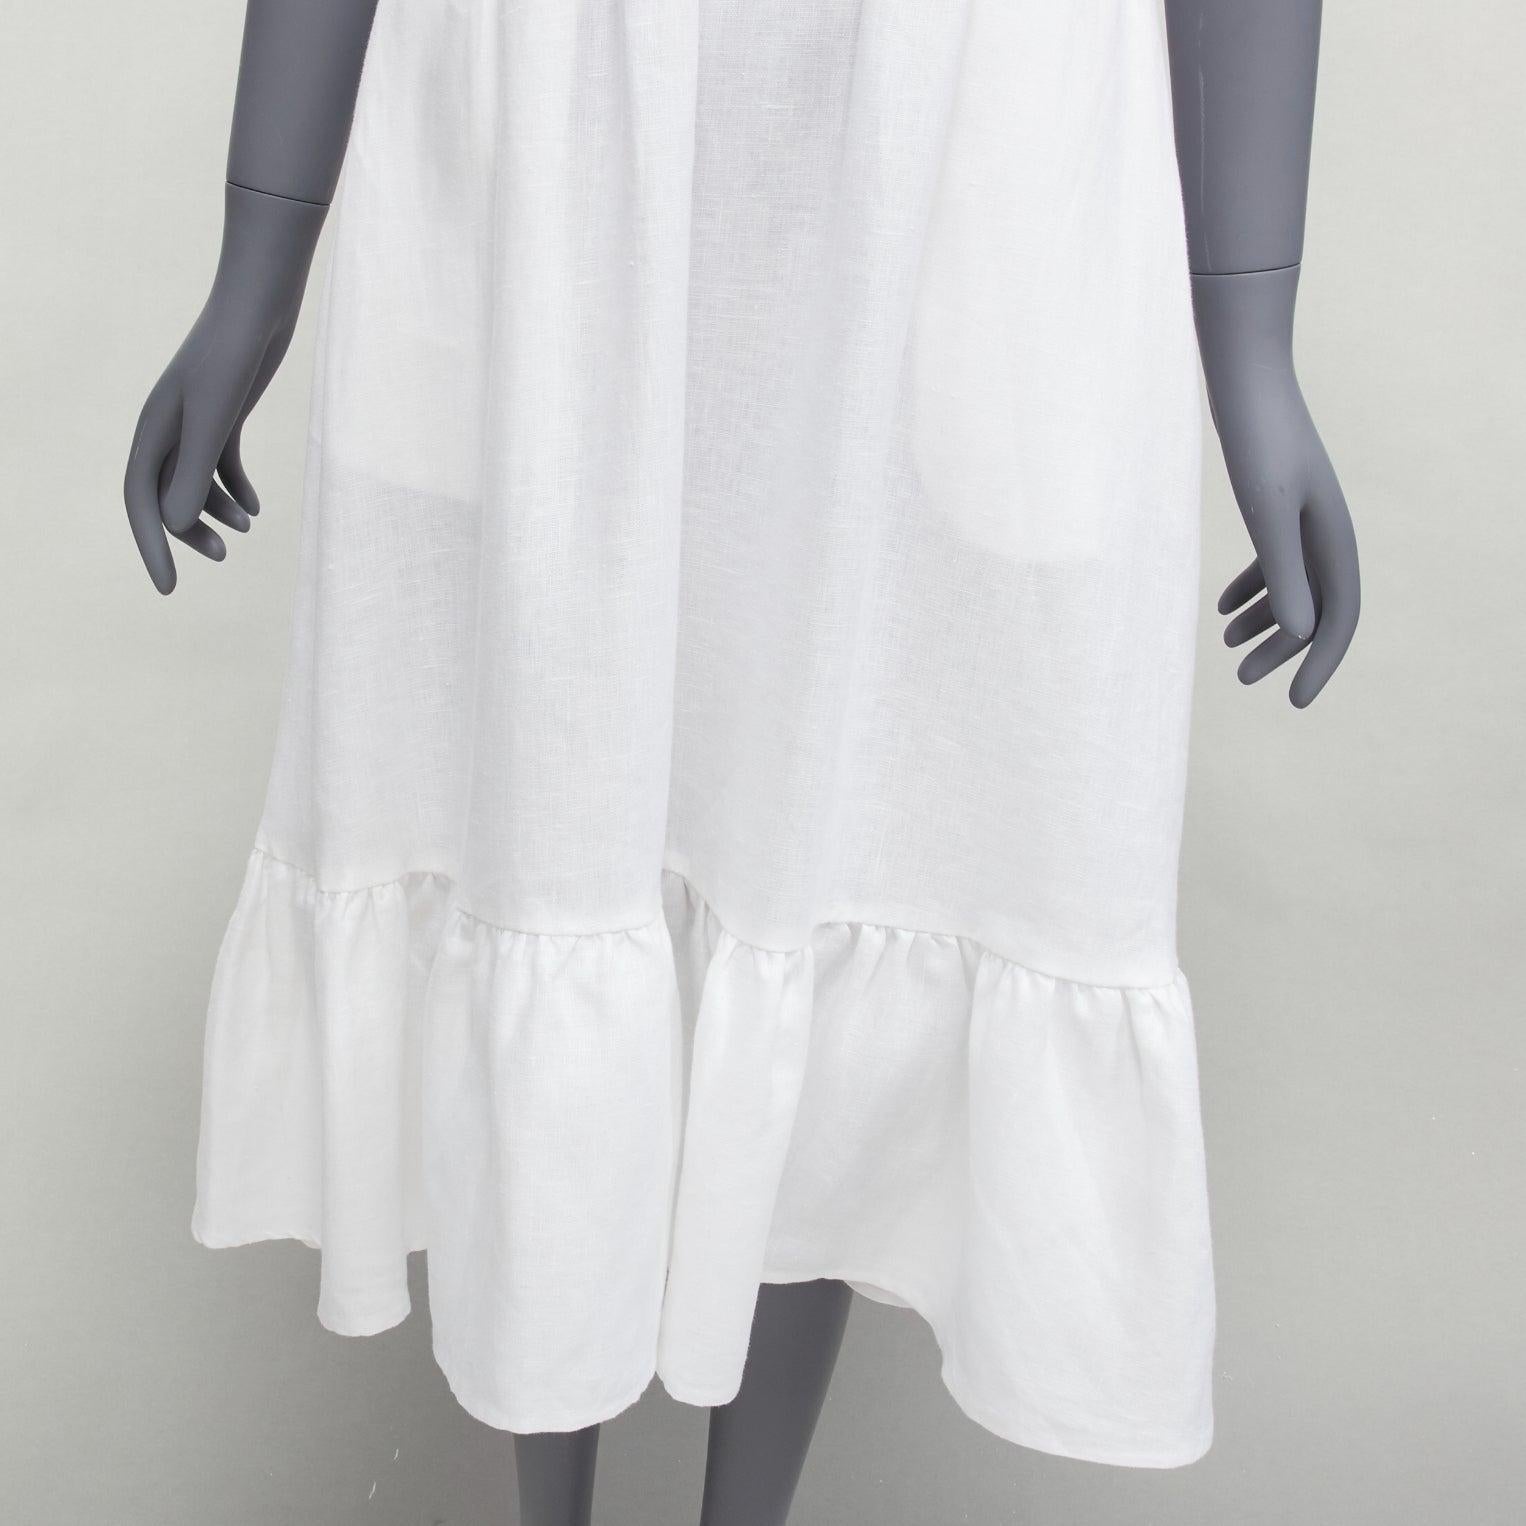 REFORMATION Dolci white linen flute hem hook eye trumpet dress US0 XS
Reference: SNKO/A00399
Brand: Reformation
Model: Dolci
Material: Linen
Color: White
Pattern: Solid
Closure: Hook & Eye
Lining: White Fabric
Extra Details: e Dolci is a midi length